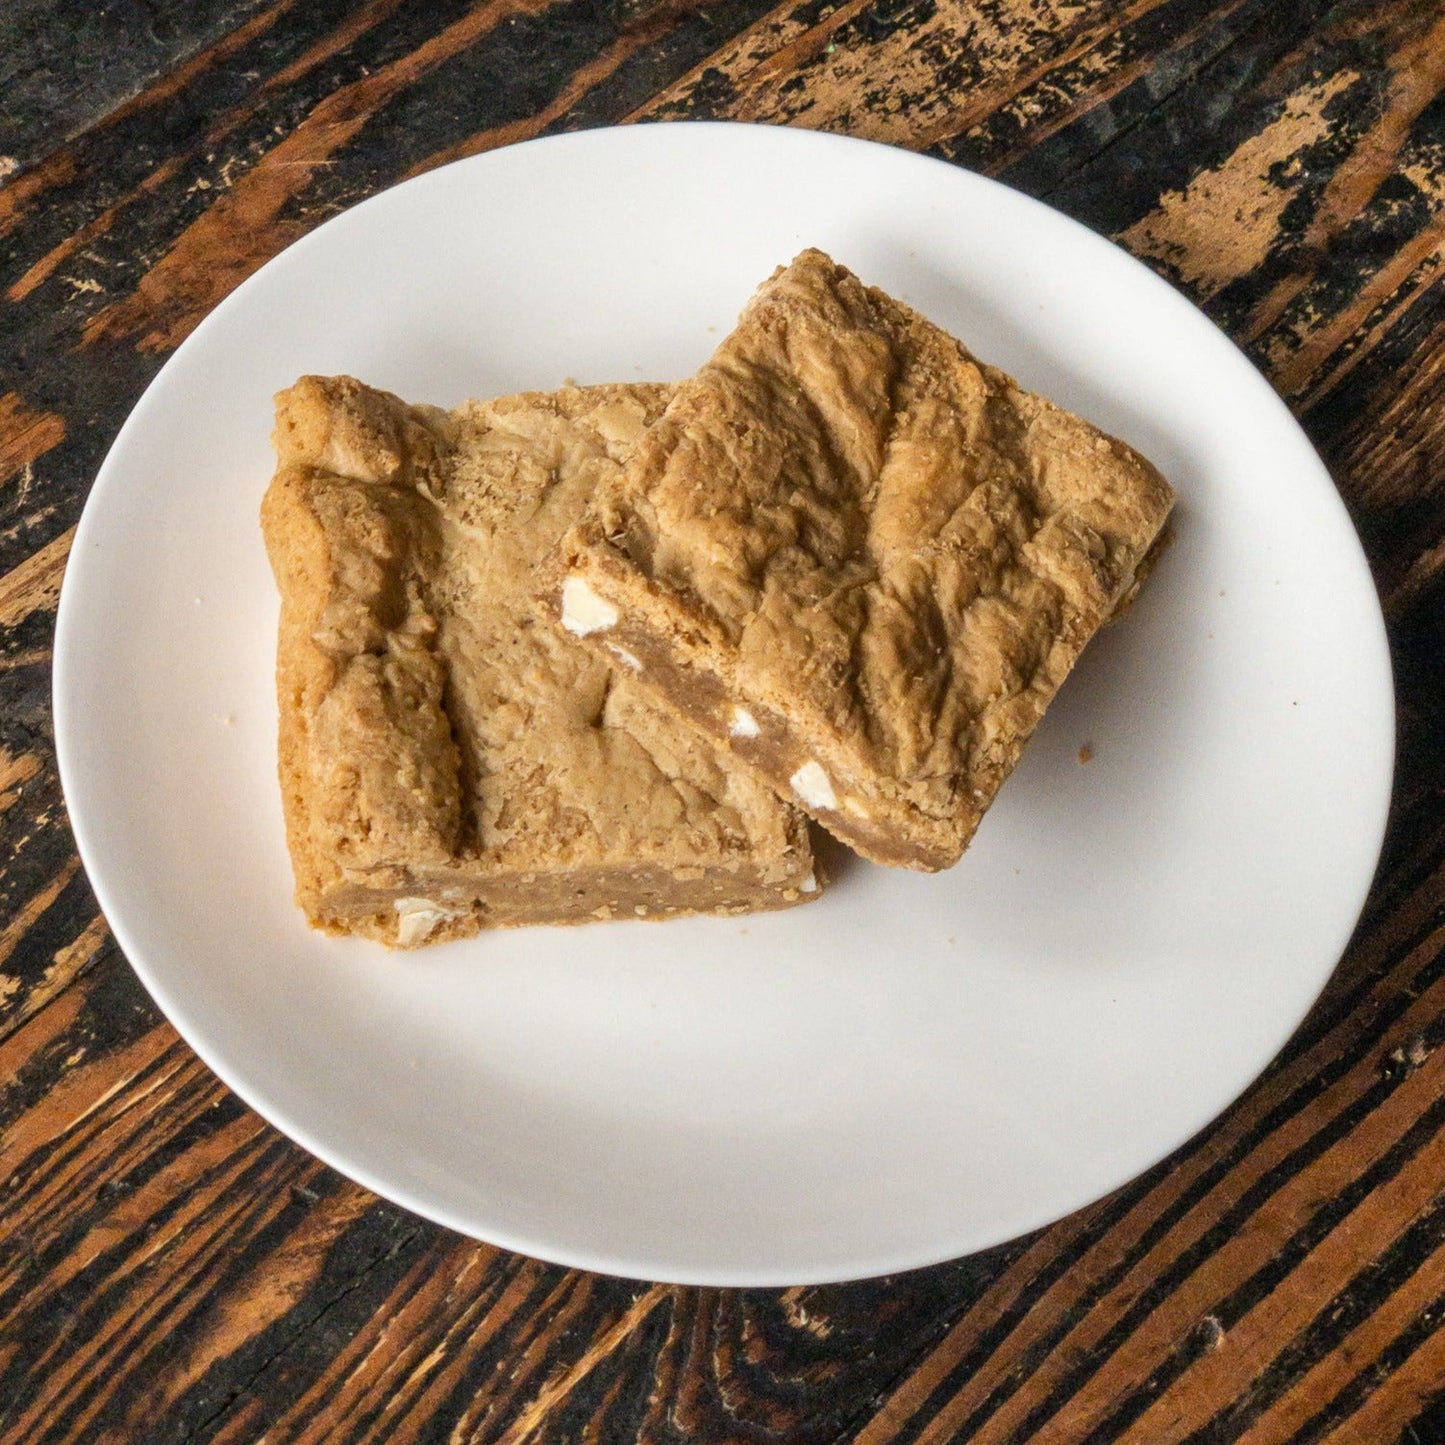 Blondie | White Chocolate Brownie Baked Goods - The Meeting Place on Market